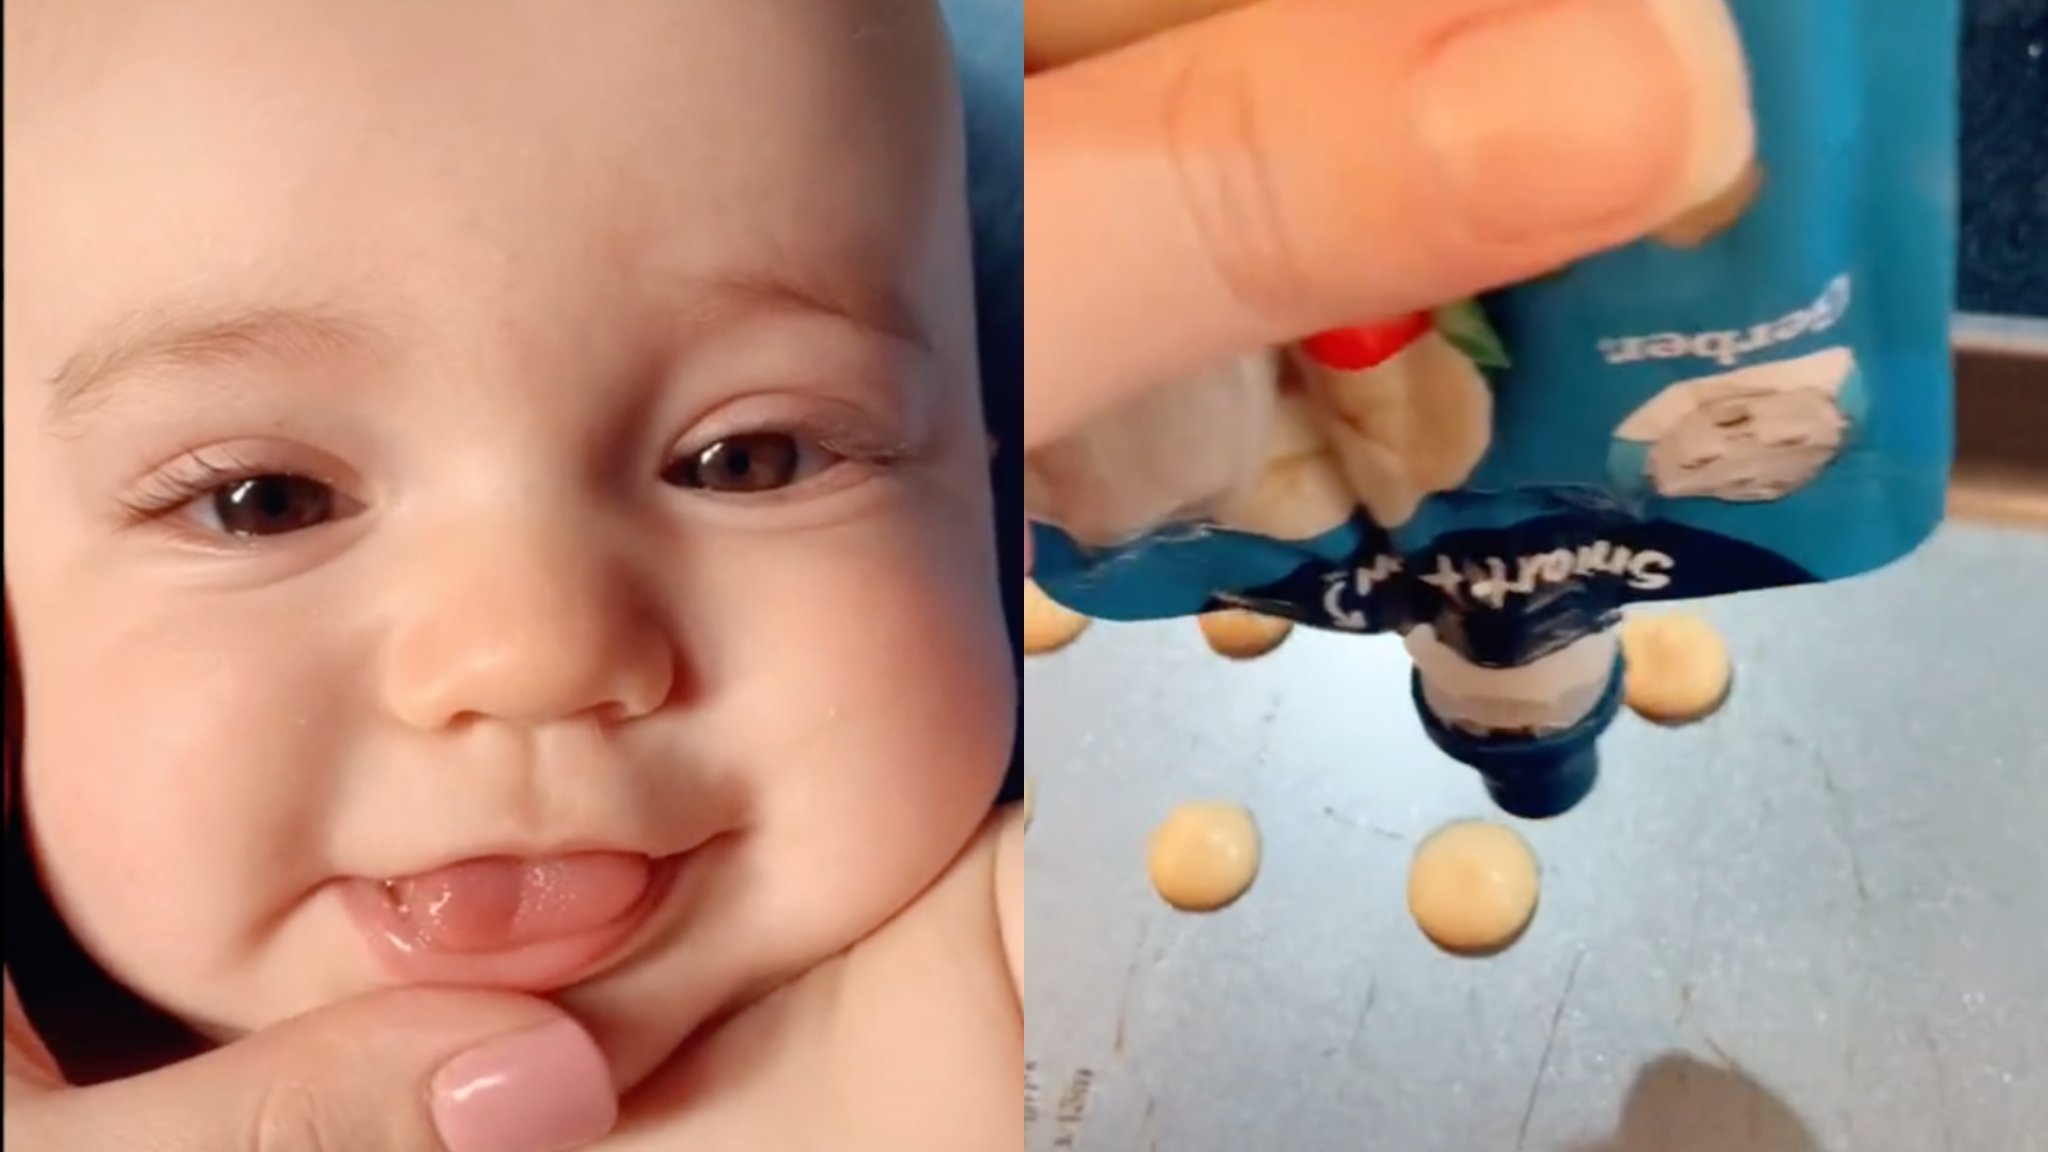 People Are Divided Over TikTok Mom's 'Simple' Teething Hack